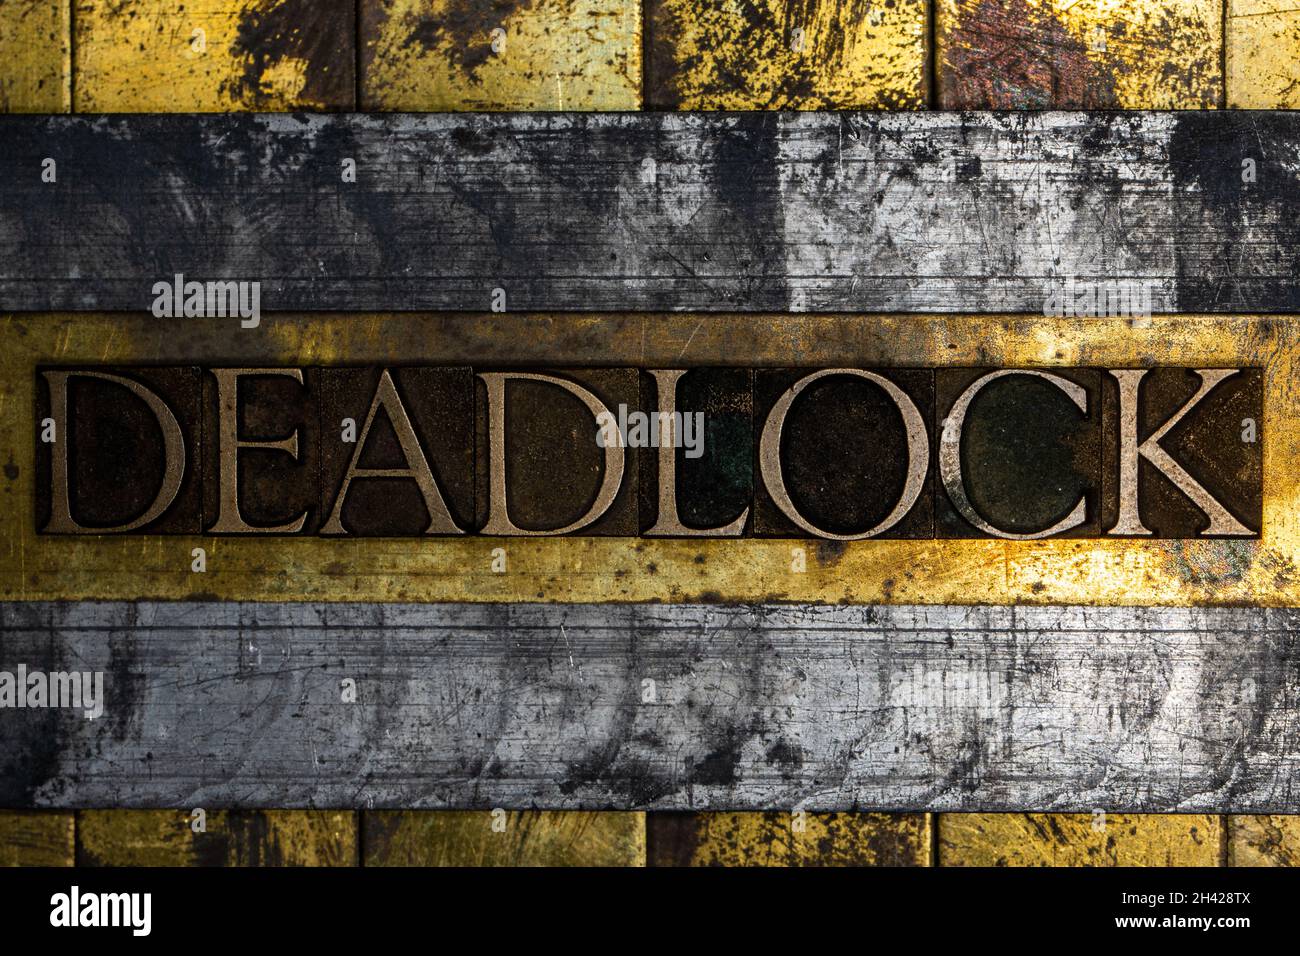 Deadlock text on textured grunge copper and vintage gold background Stock Photo